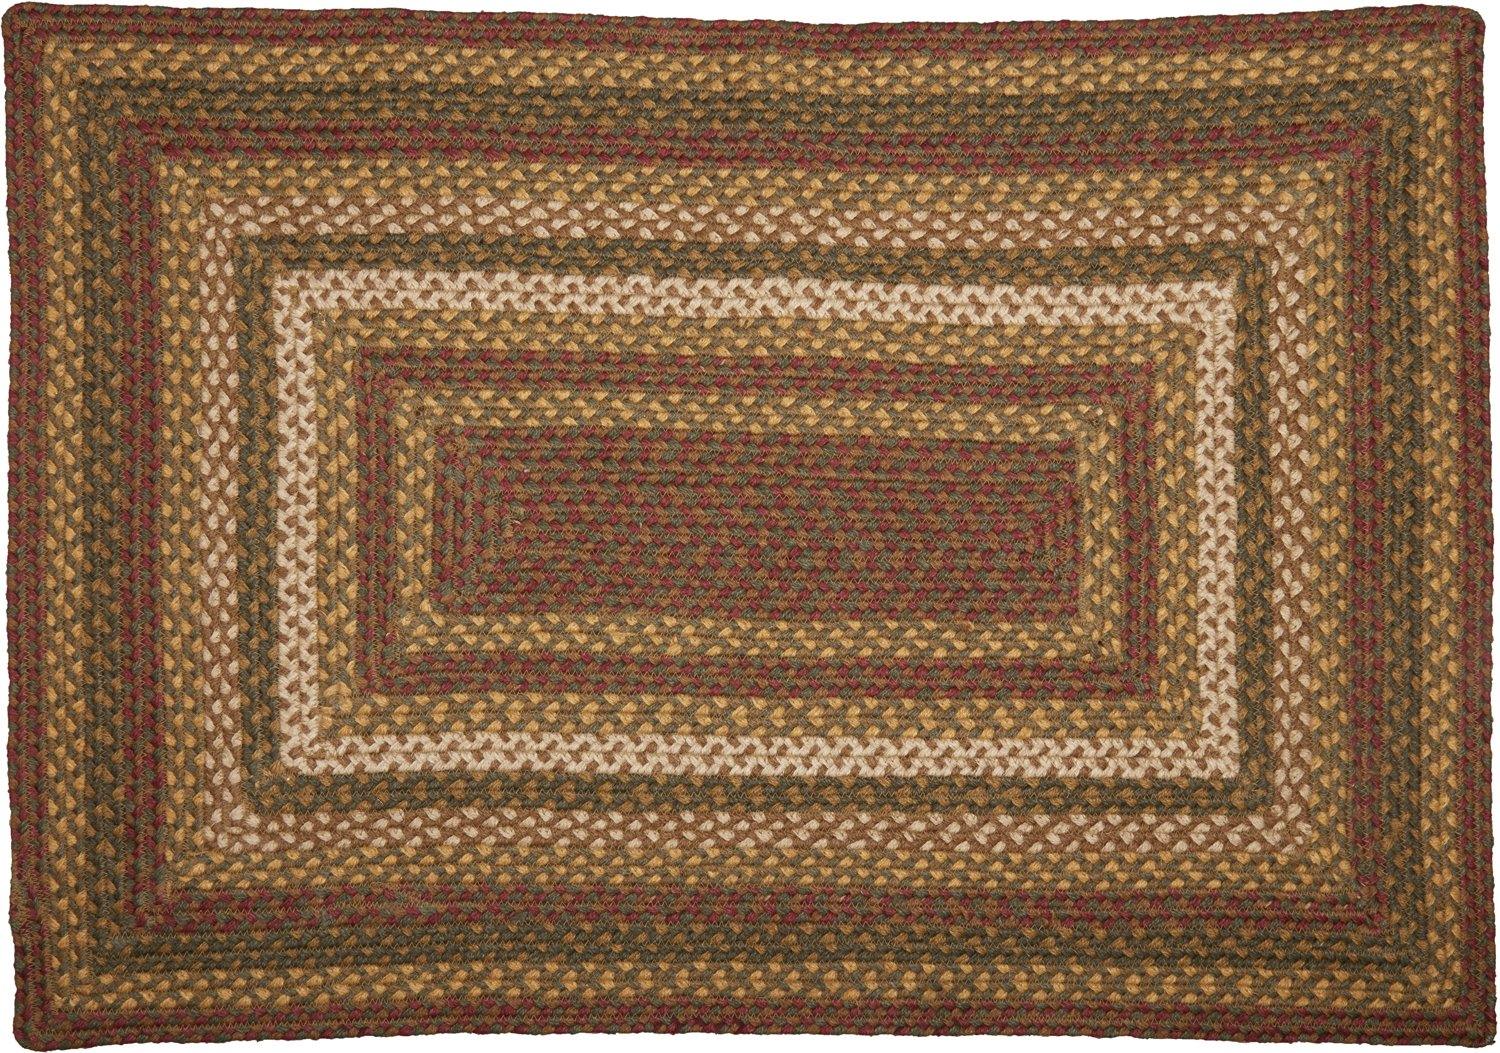 Tea Cabin Jute Braided Rug Rect 24"x36" with Rug Pad VHC Brands - The Fox Decor